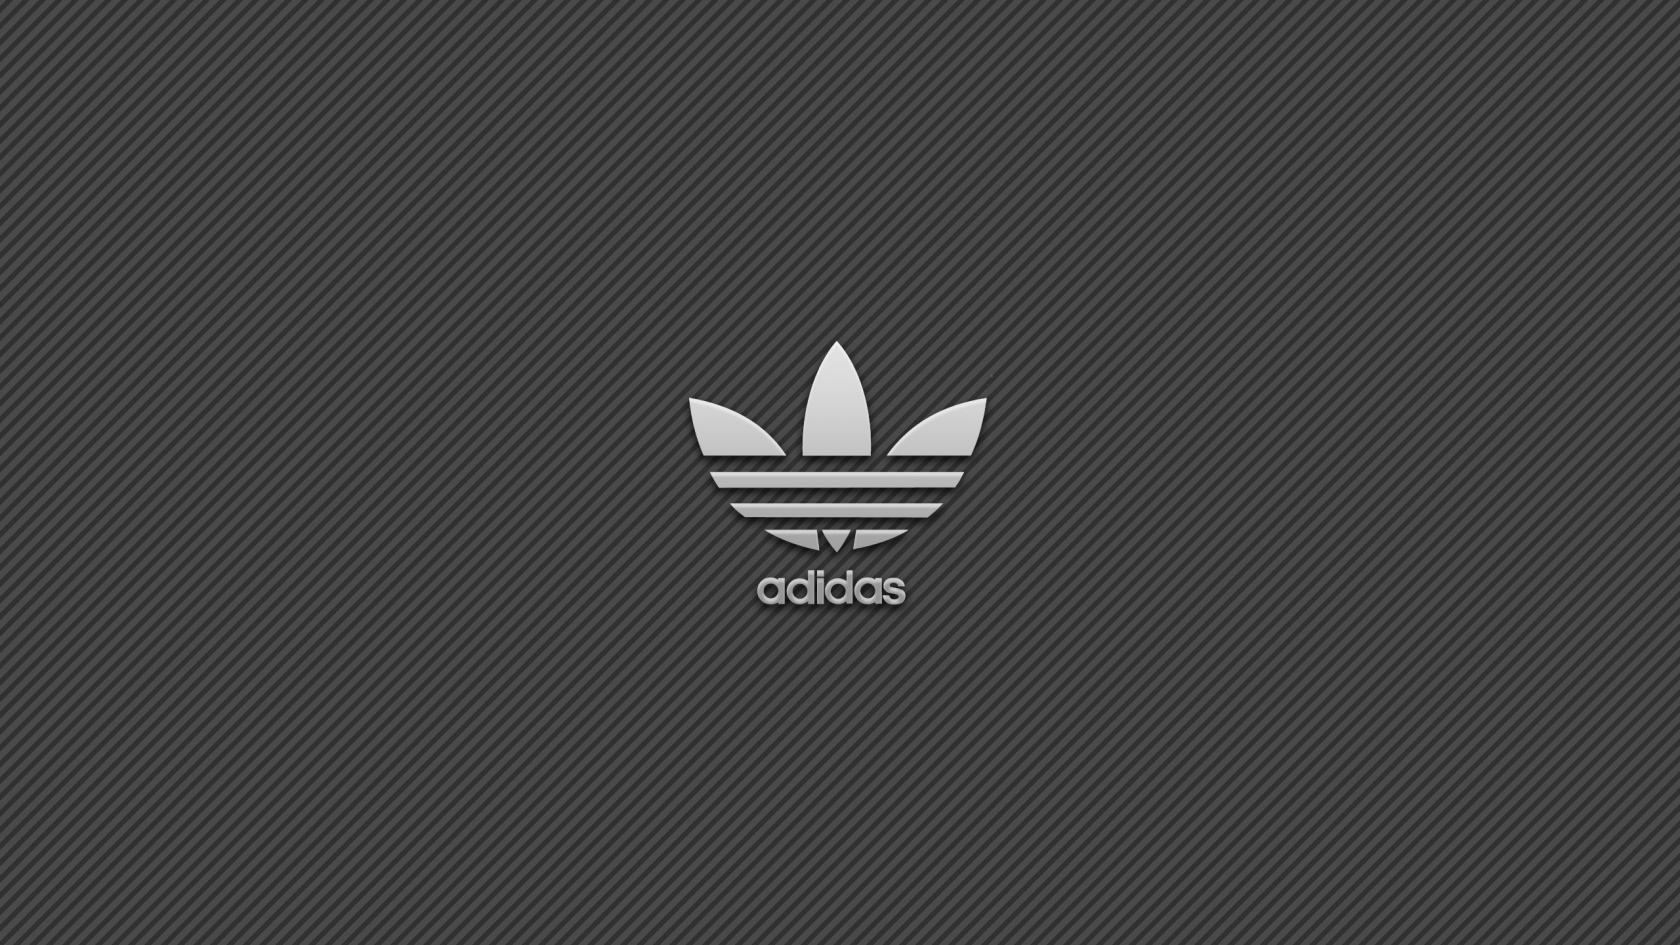 Adidas Simple Logo Background for 1680 x 945 HDTV resolution